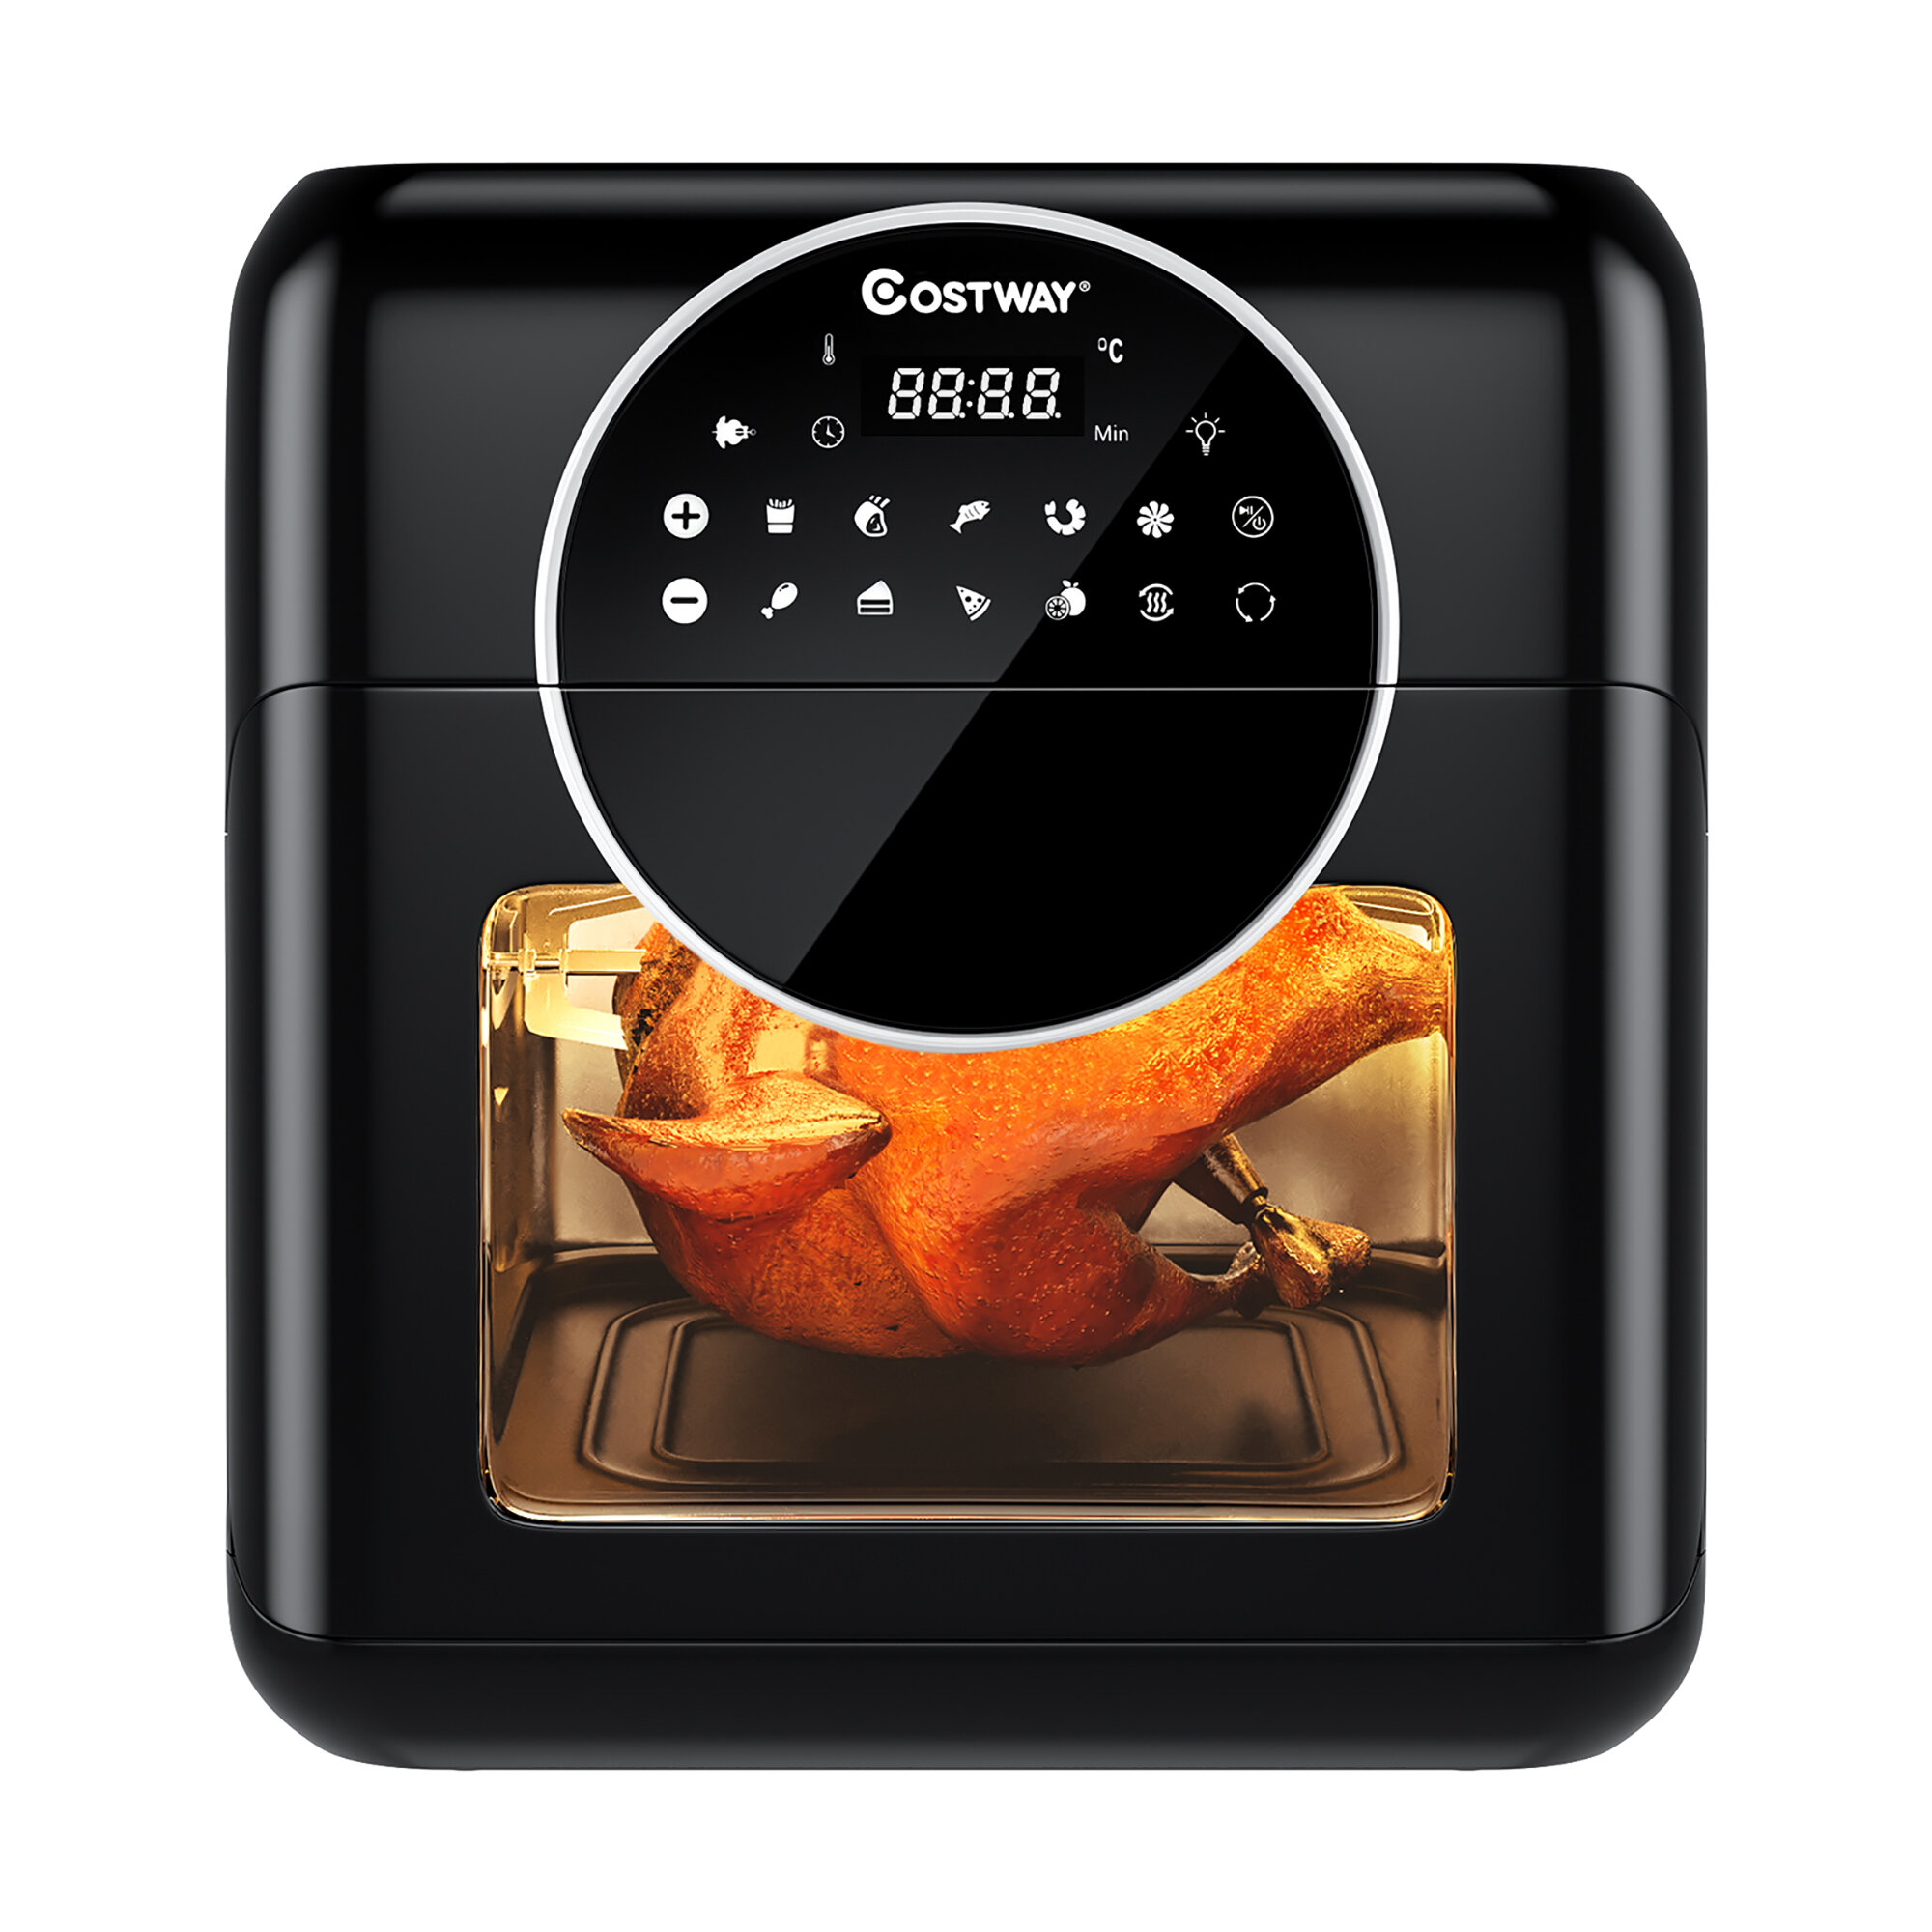 8-in-1 Convection Air Fryer Toaster Oven with 5 Accessories and Recipe